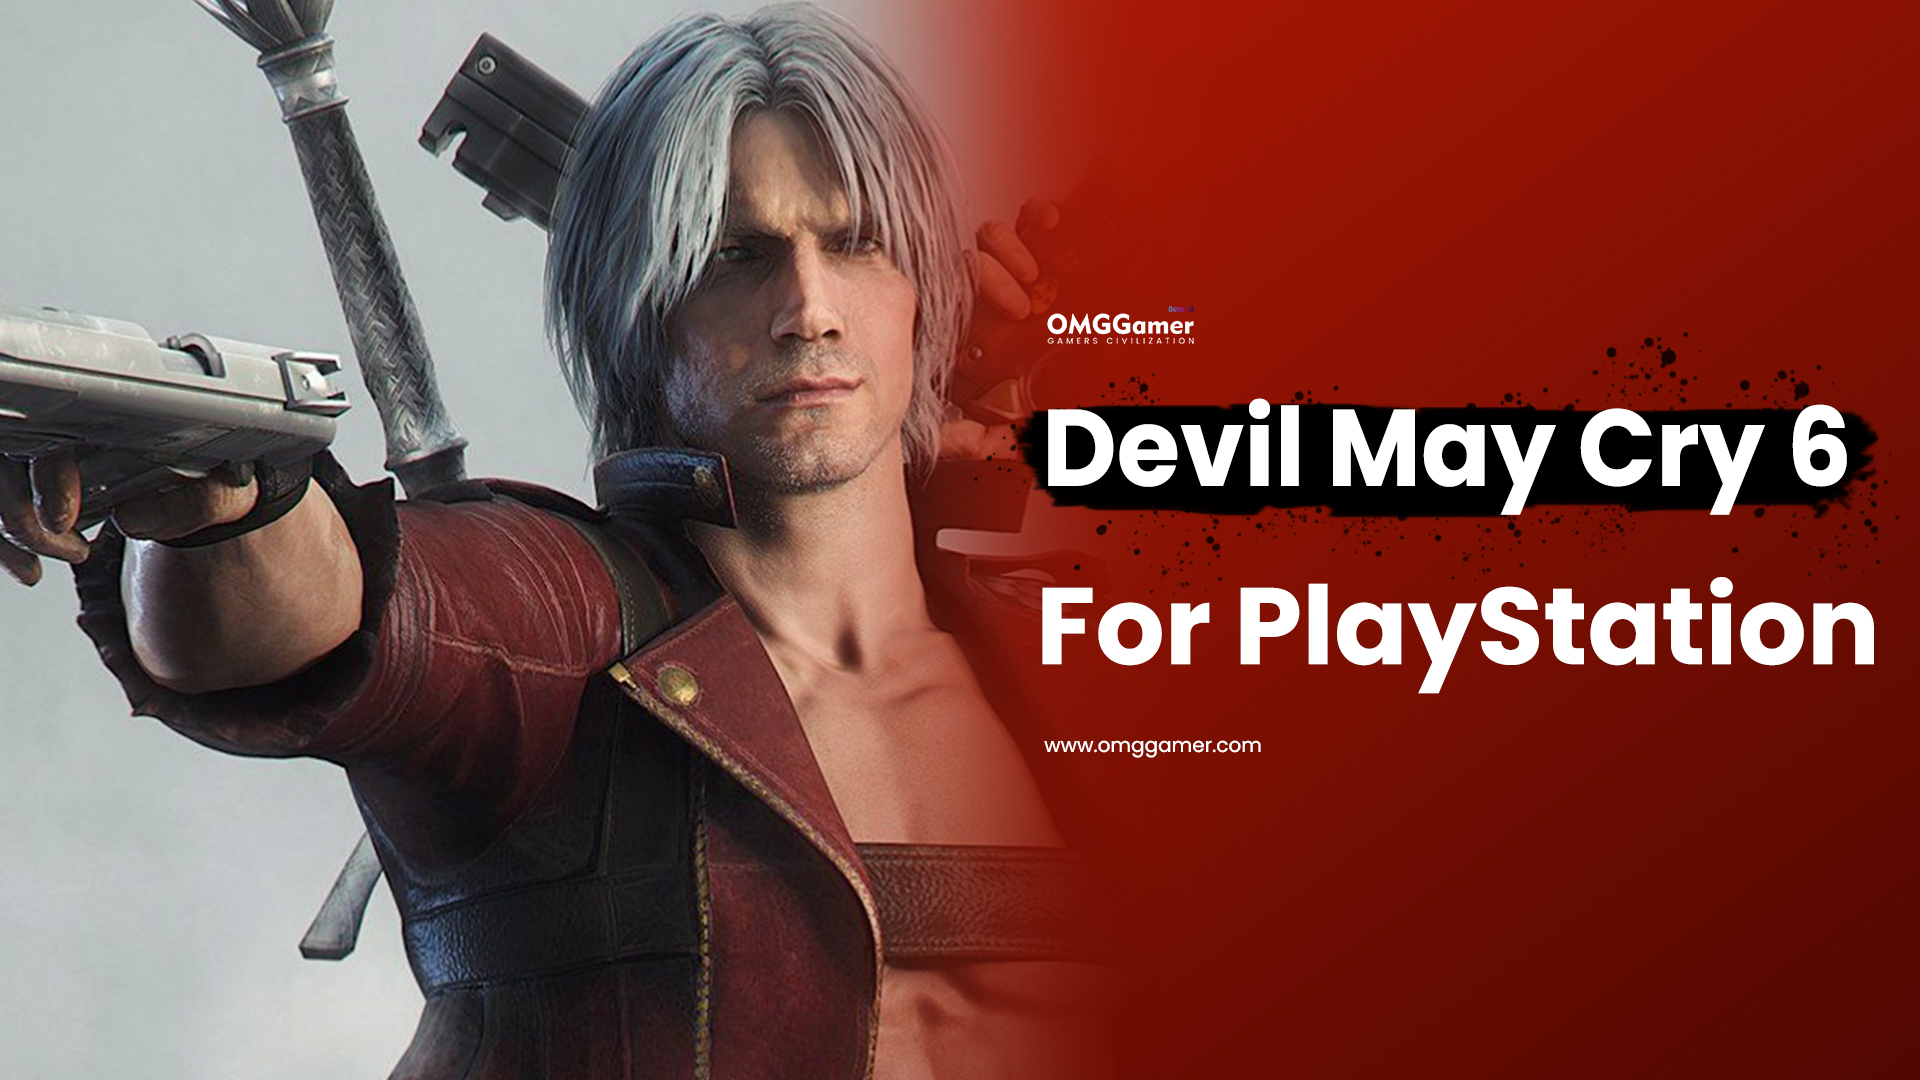 Devil May Cry 6 for PlayStation